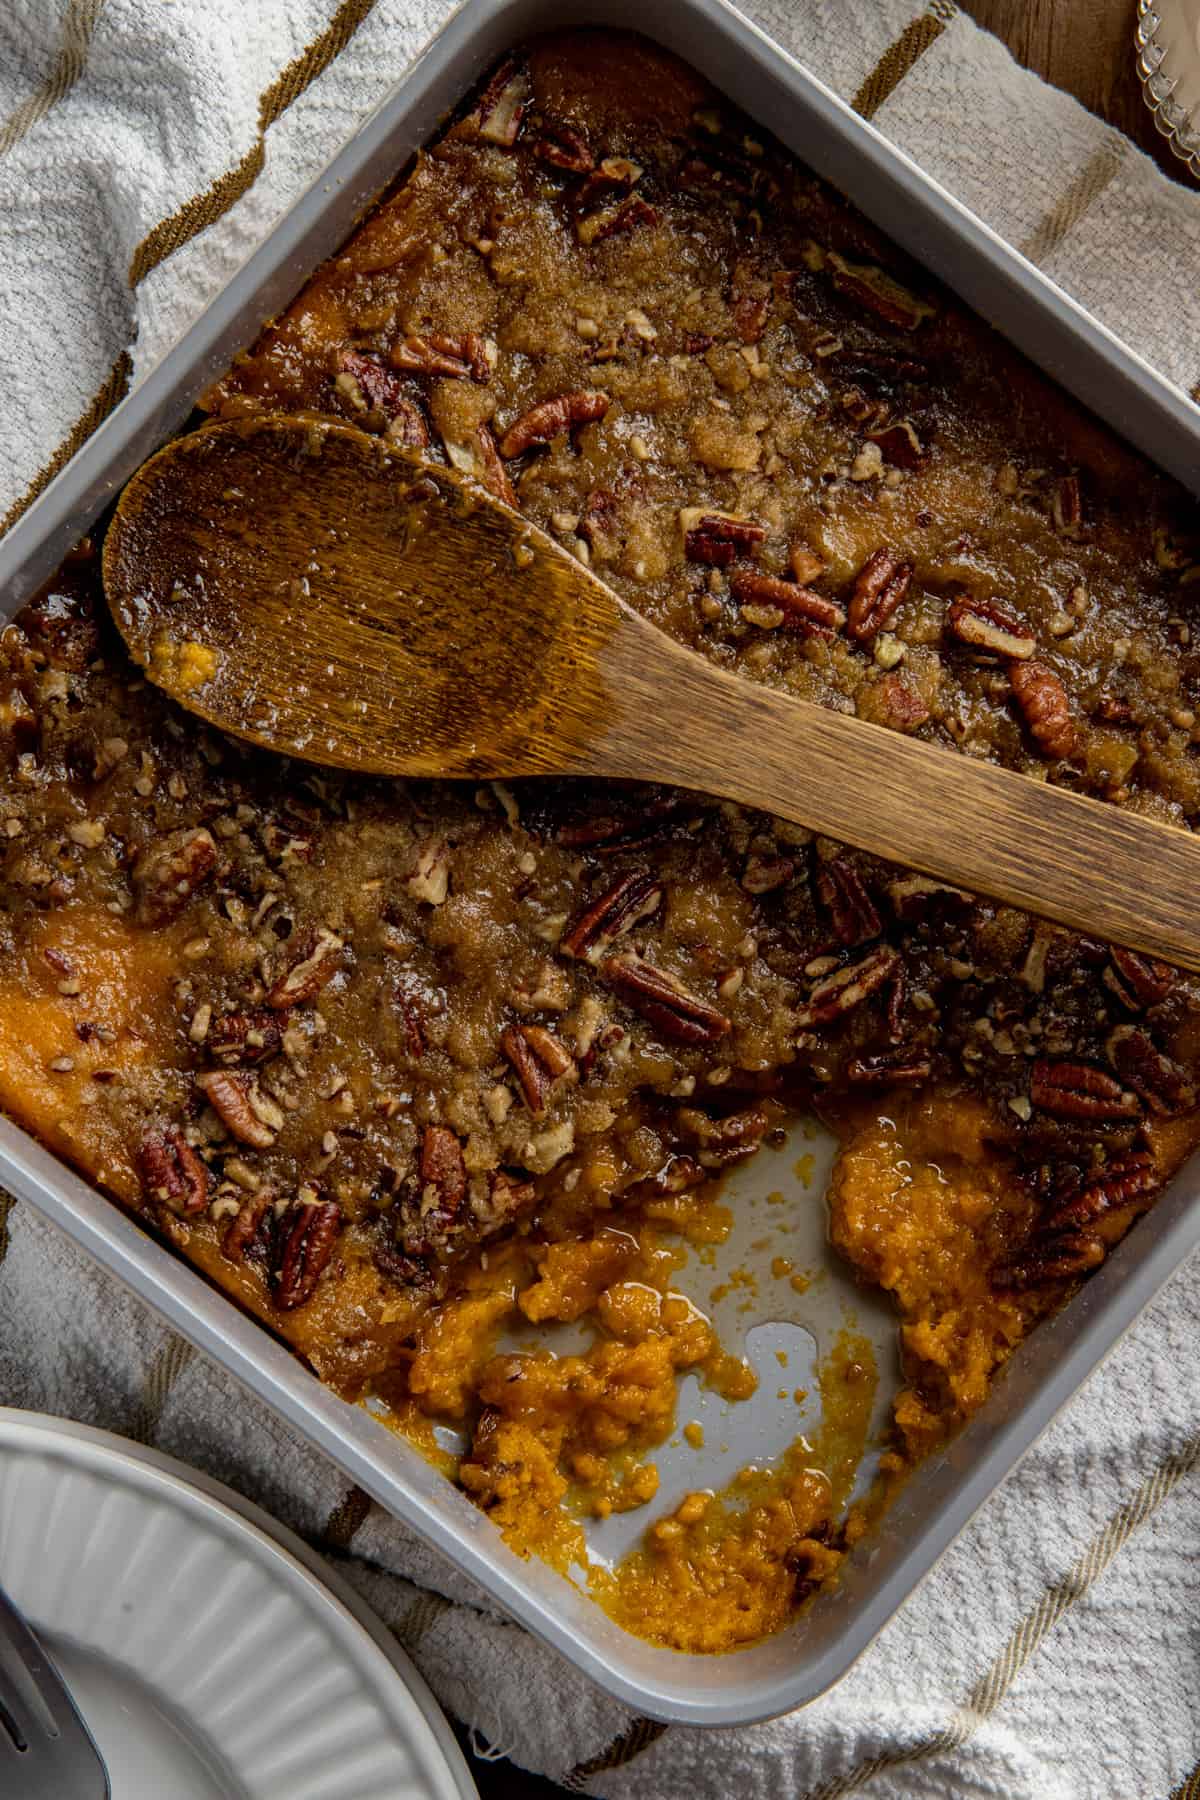 Baked sweet potato casserole in square aluminum pan. Wooden spoon on top of casserole with one serving removed.